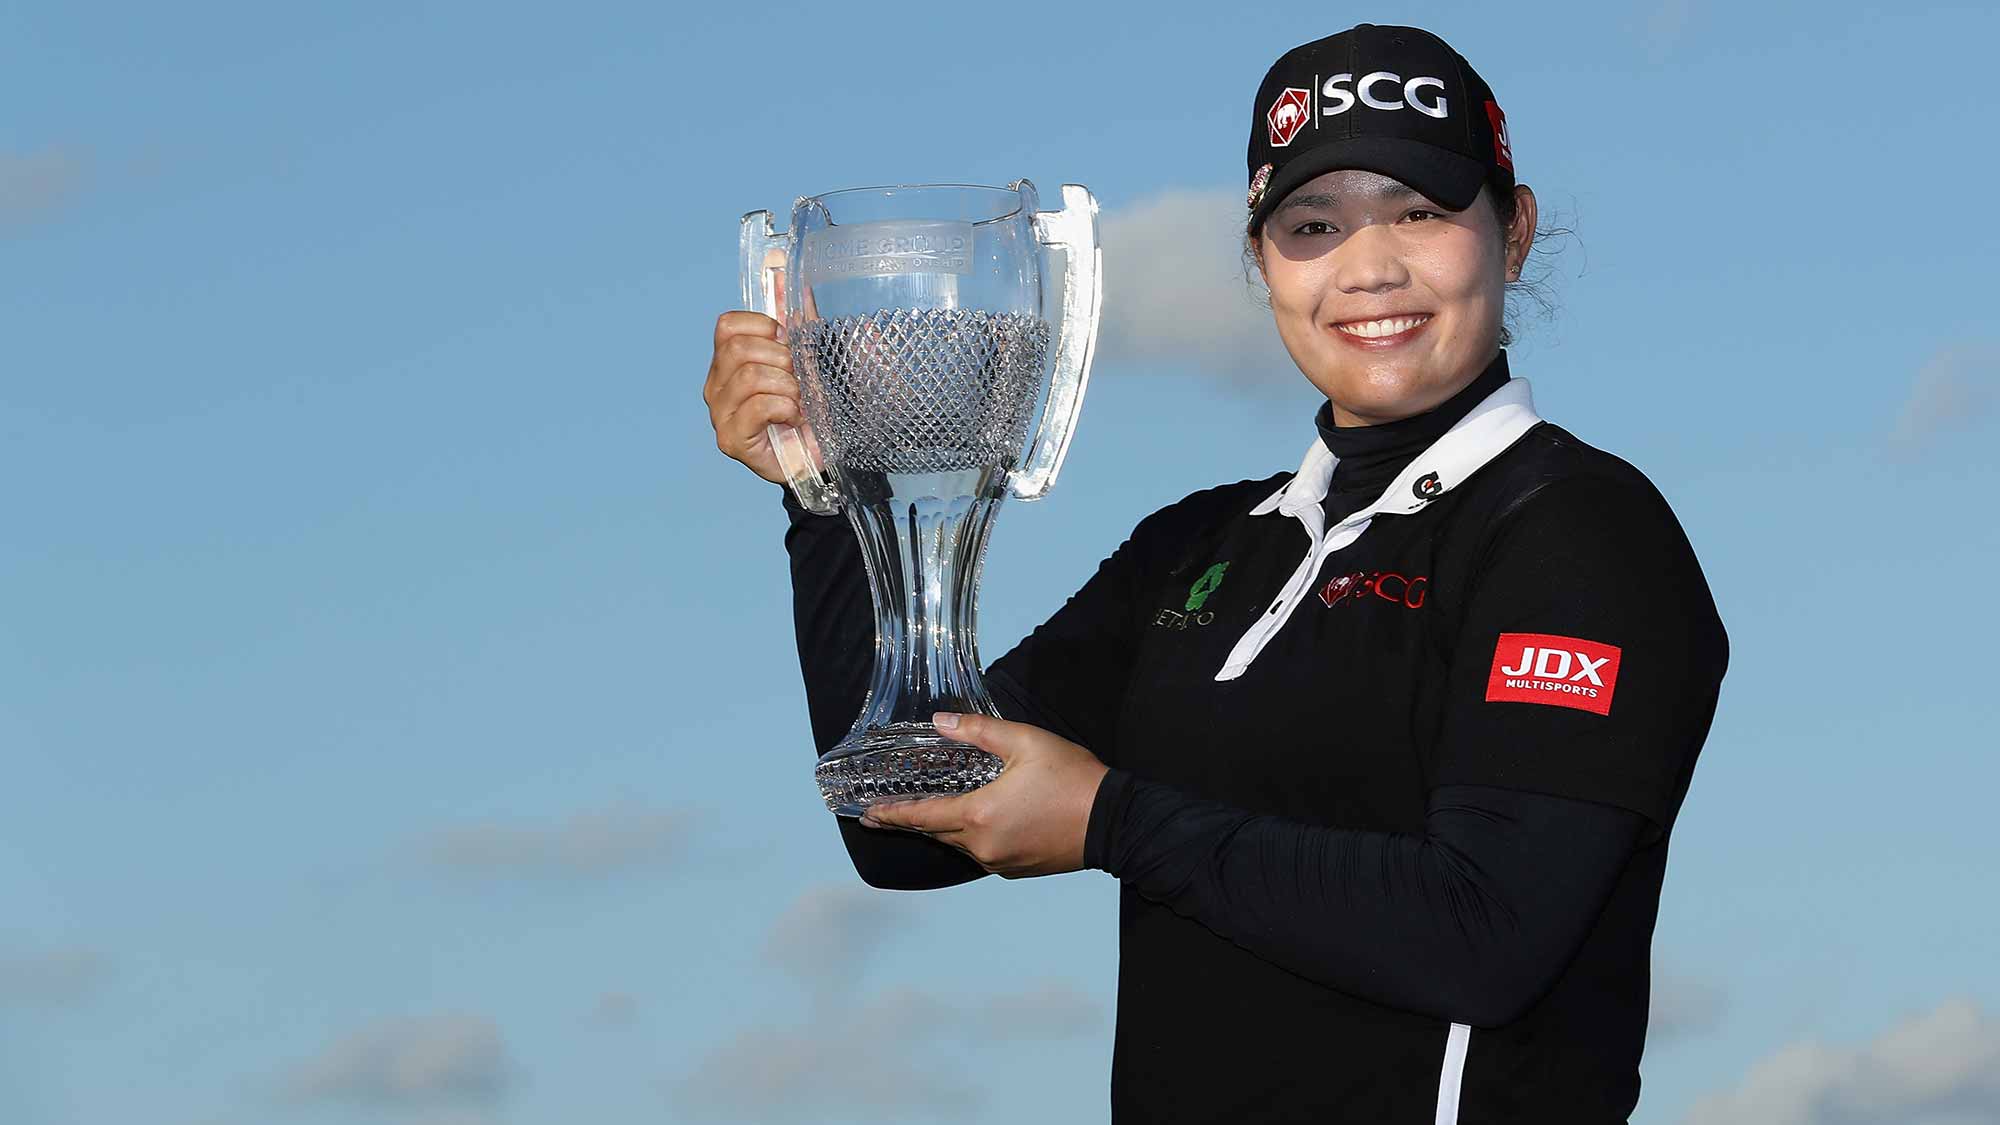 Ariya Jutanugarn of Thailand poses with the CME Group Tour Championship trophy after the final round of the CME Group Tour Championship